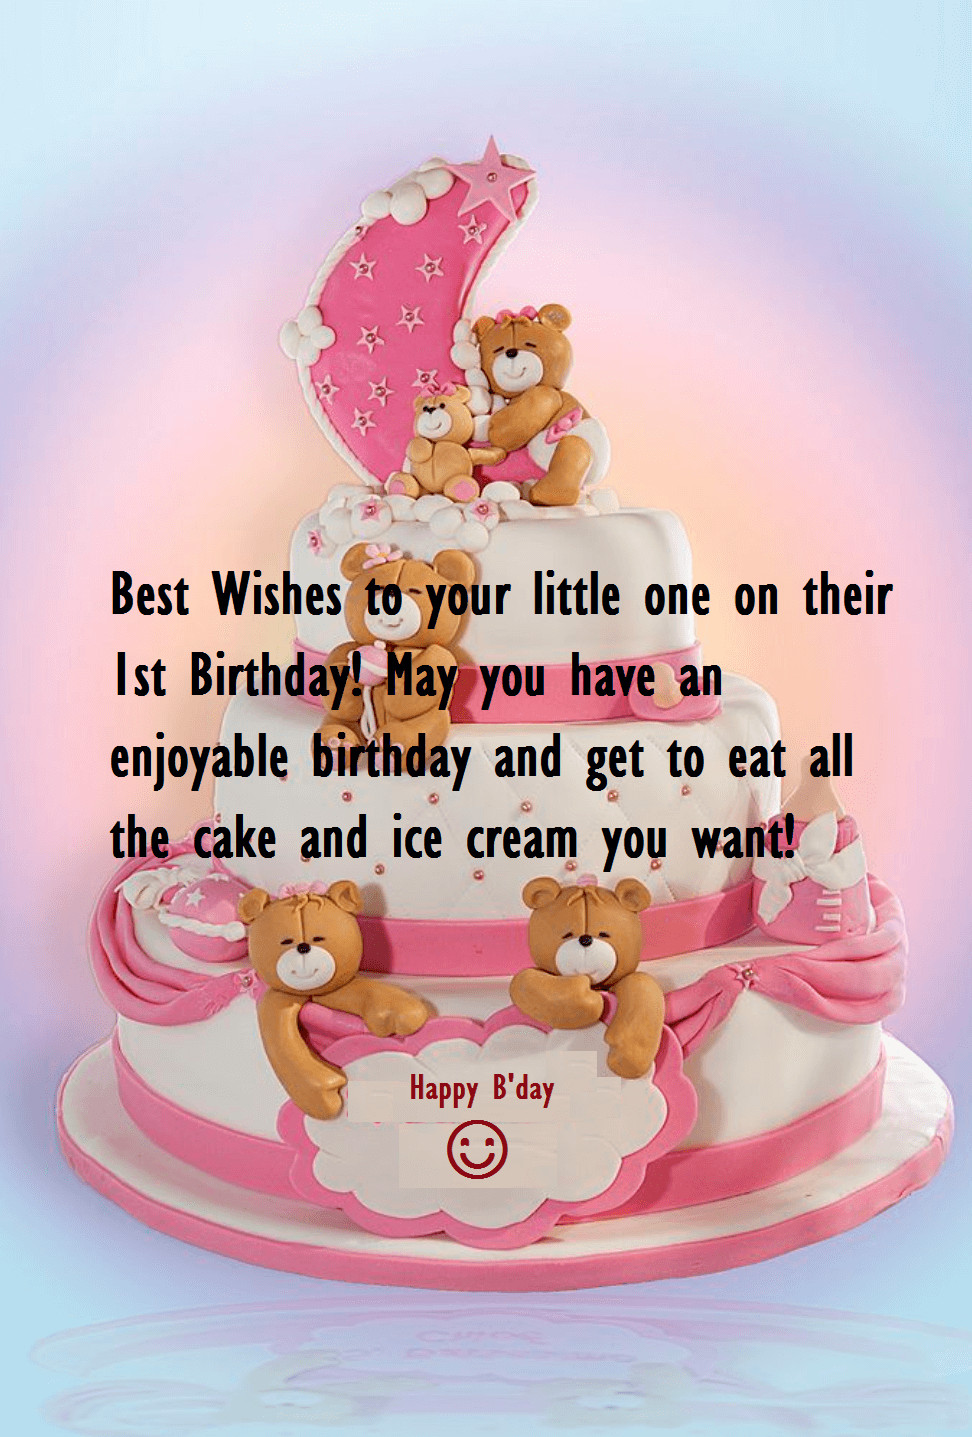 One Year Old Birthday Wishes
 Cute Birthday Cake Wishes For Baby e Year Old